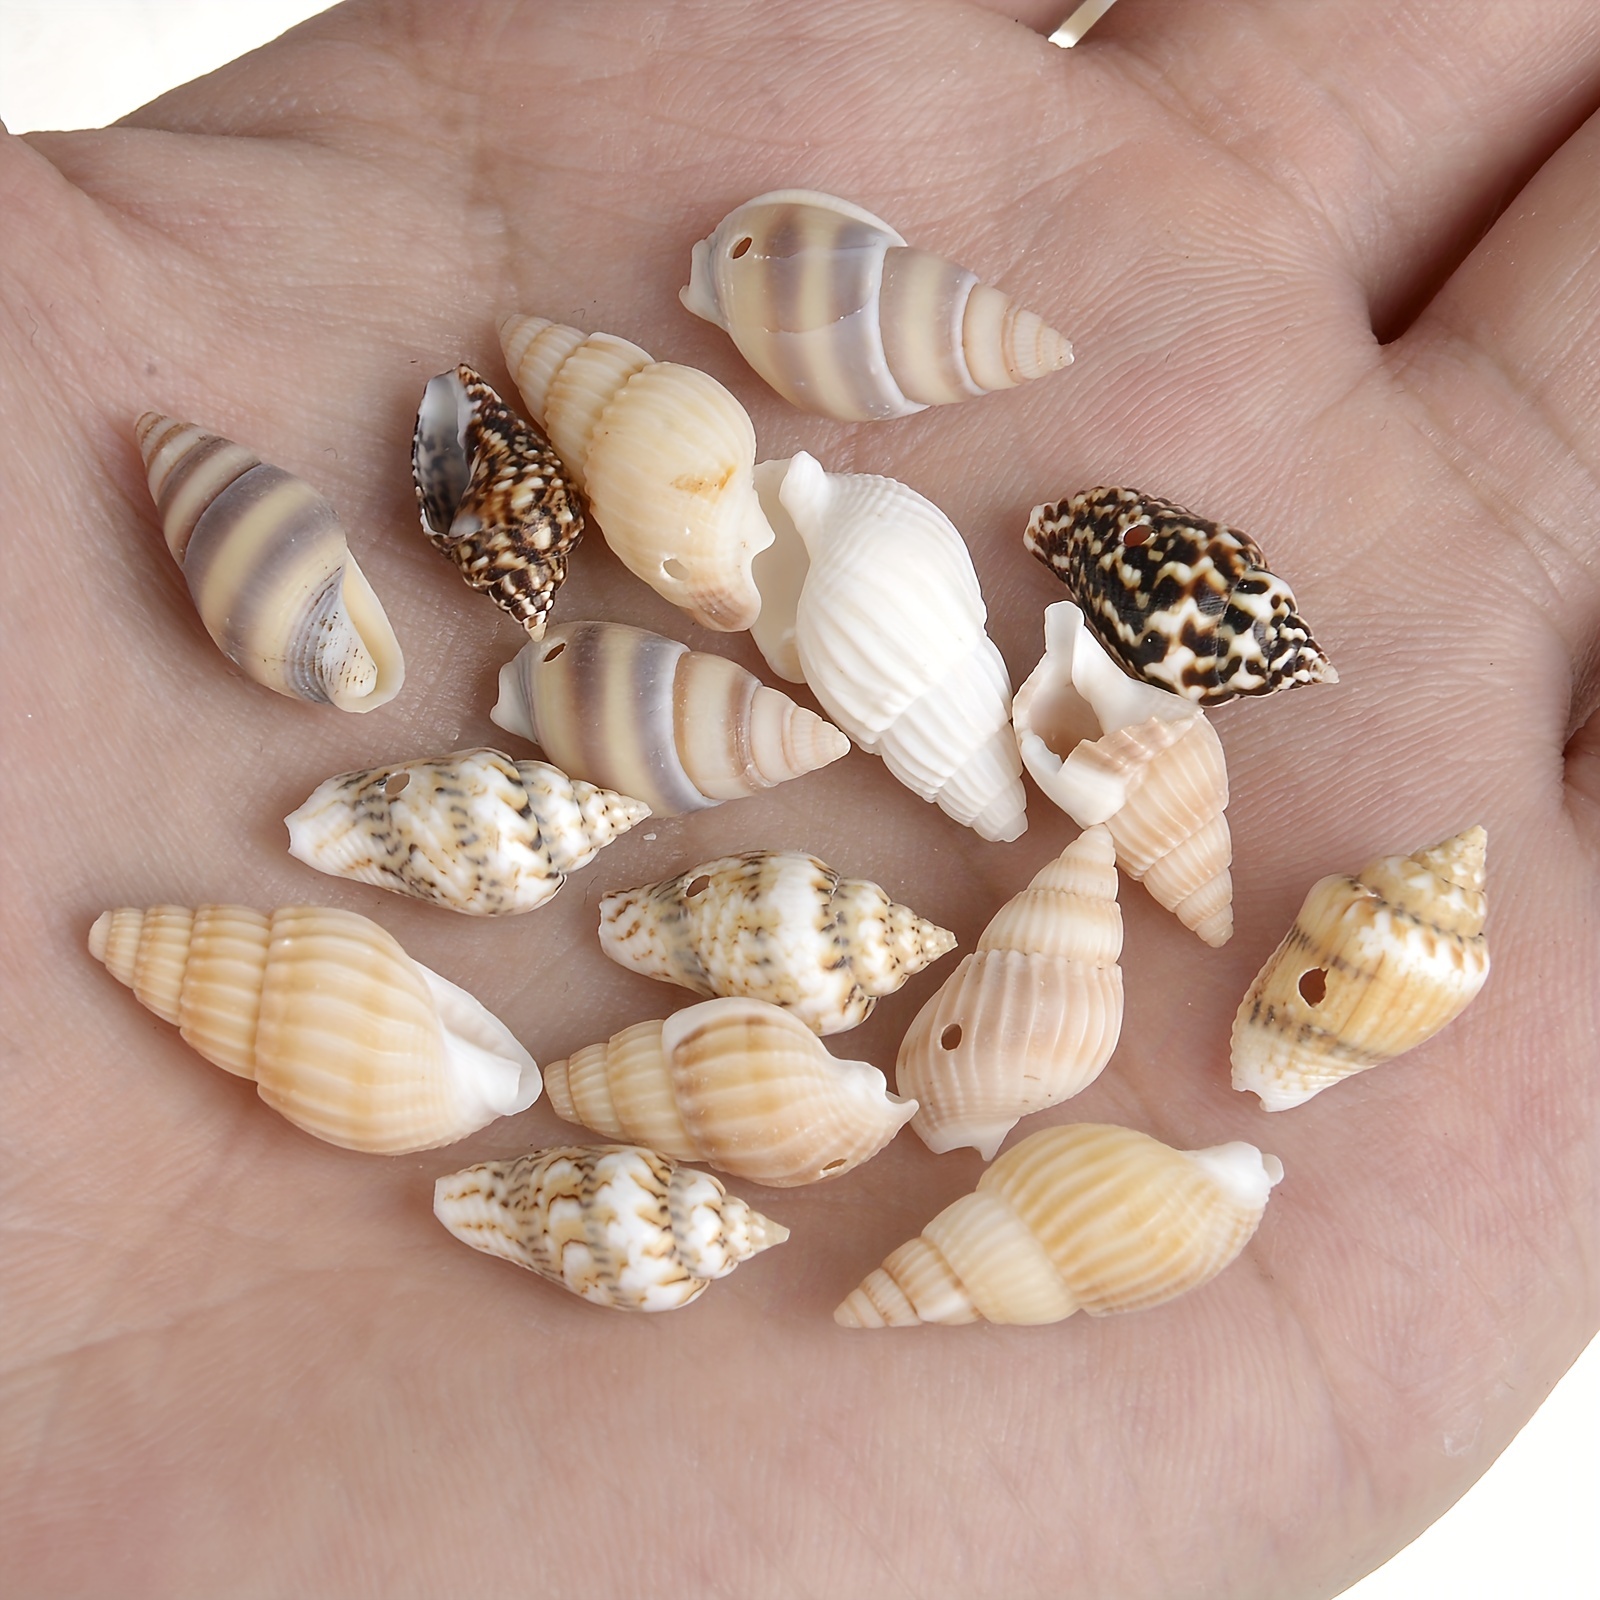 Cowrie Shells-Crafting Shells-Natural Shells-Jewerly Supplies-Shells For  Crafting-Jewerly Beads-Sea Shells Bulk